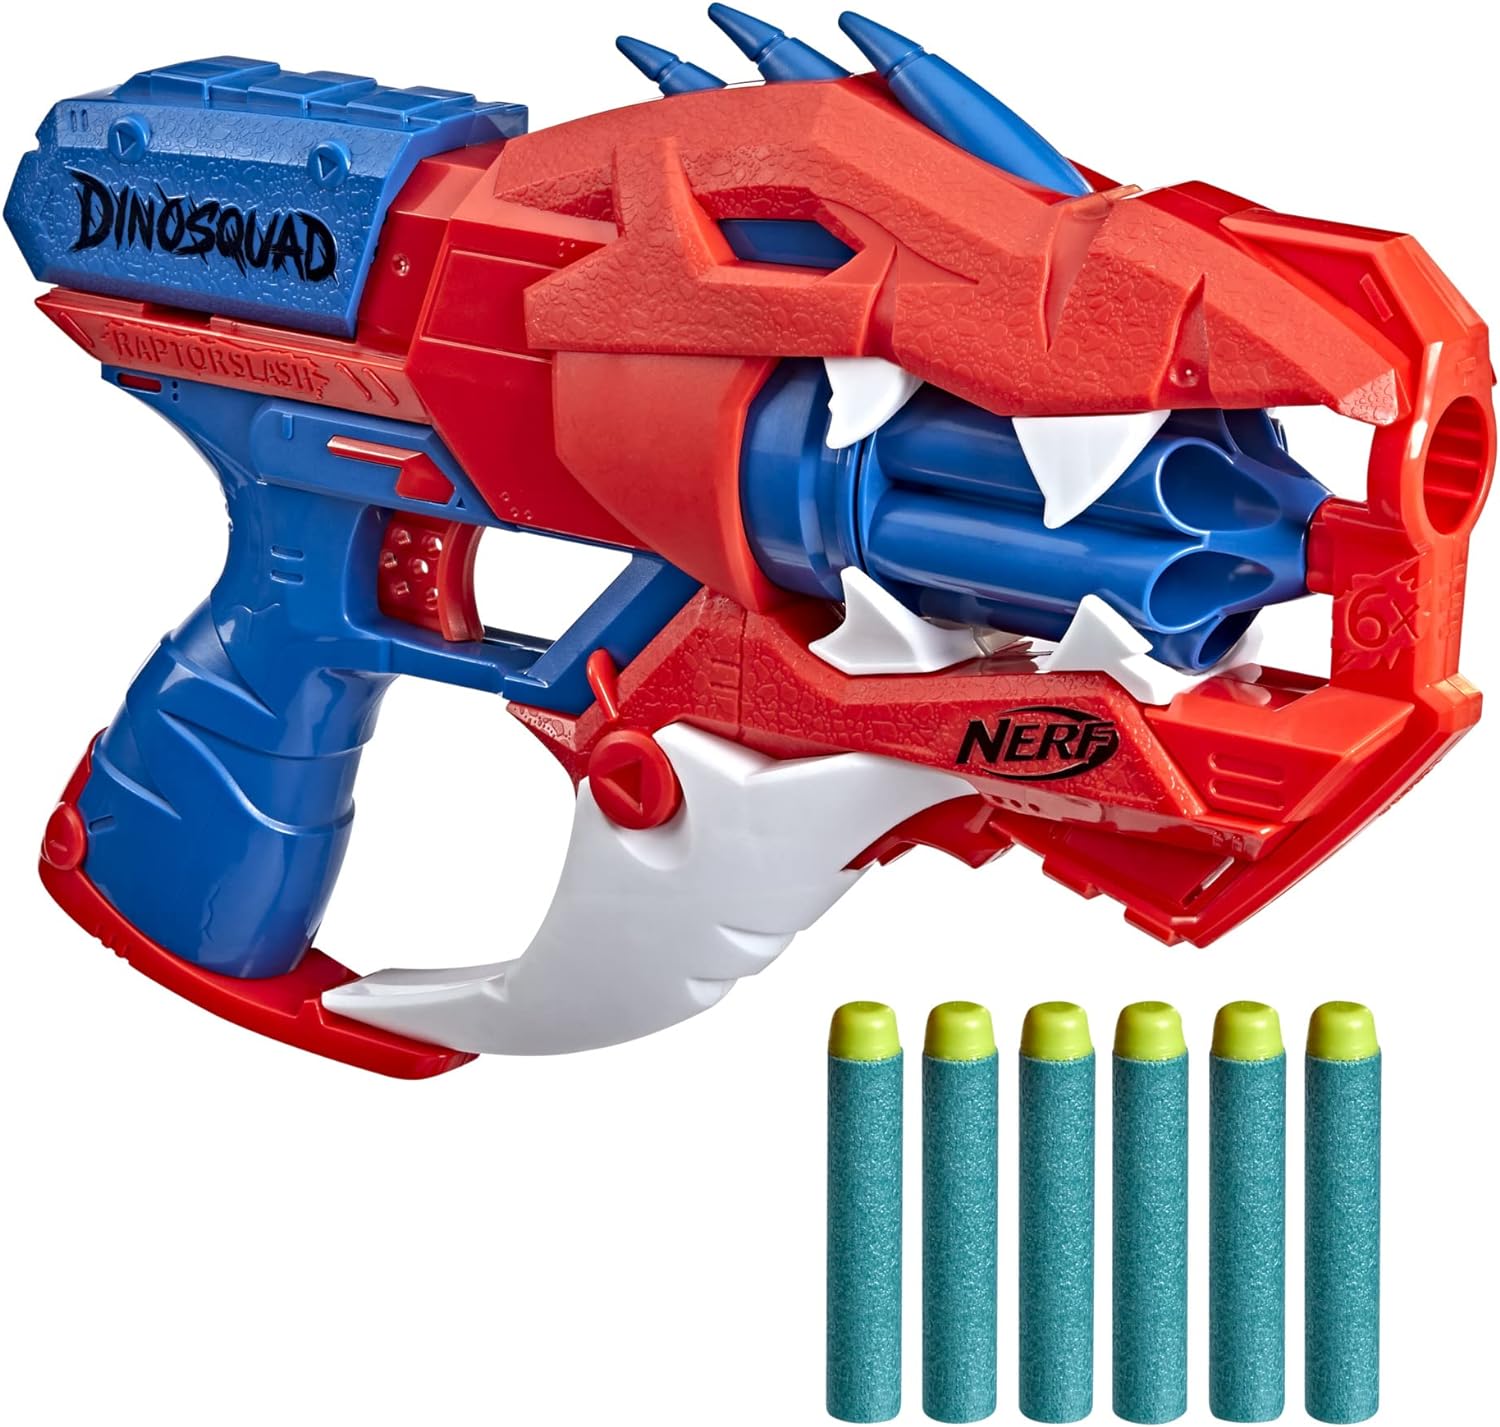 My son is super into nerf and dinos so this was a no brainer! Easy to use and got it on a great sale! There are also different models that I will also be prurchasing!